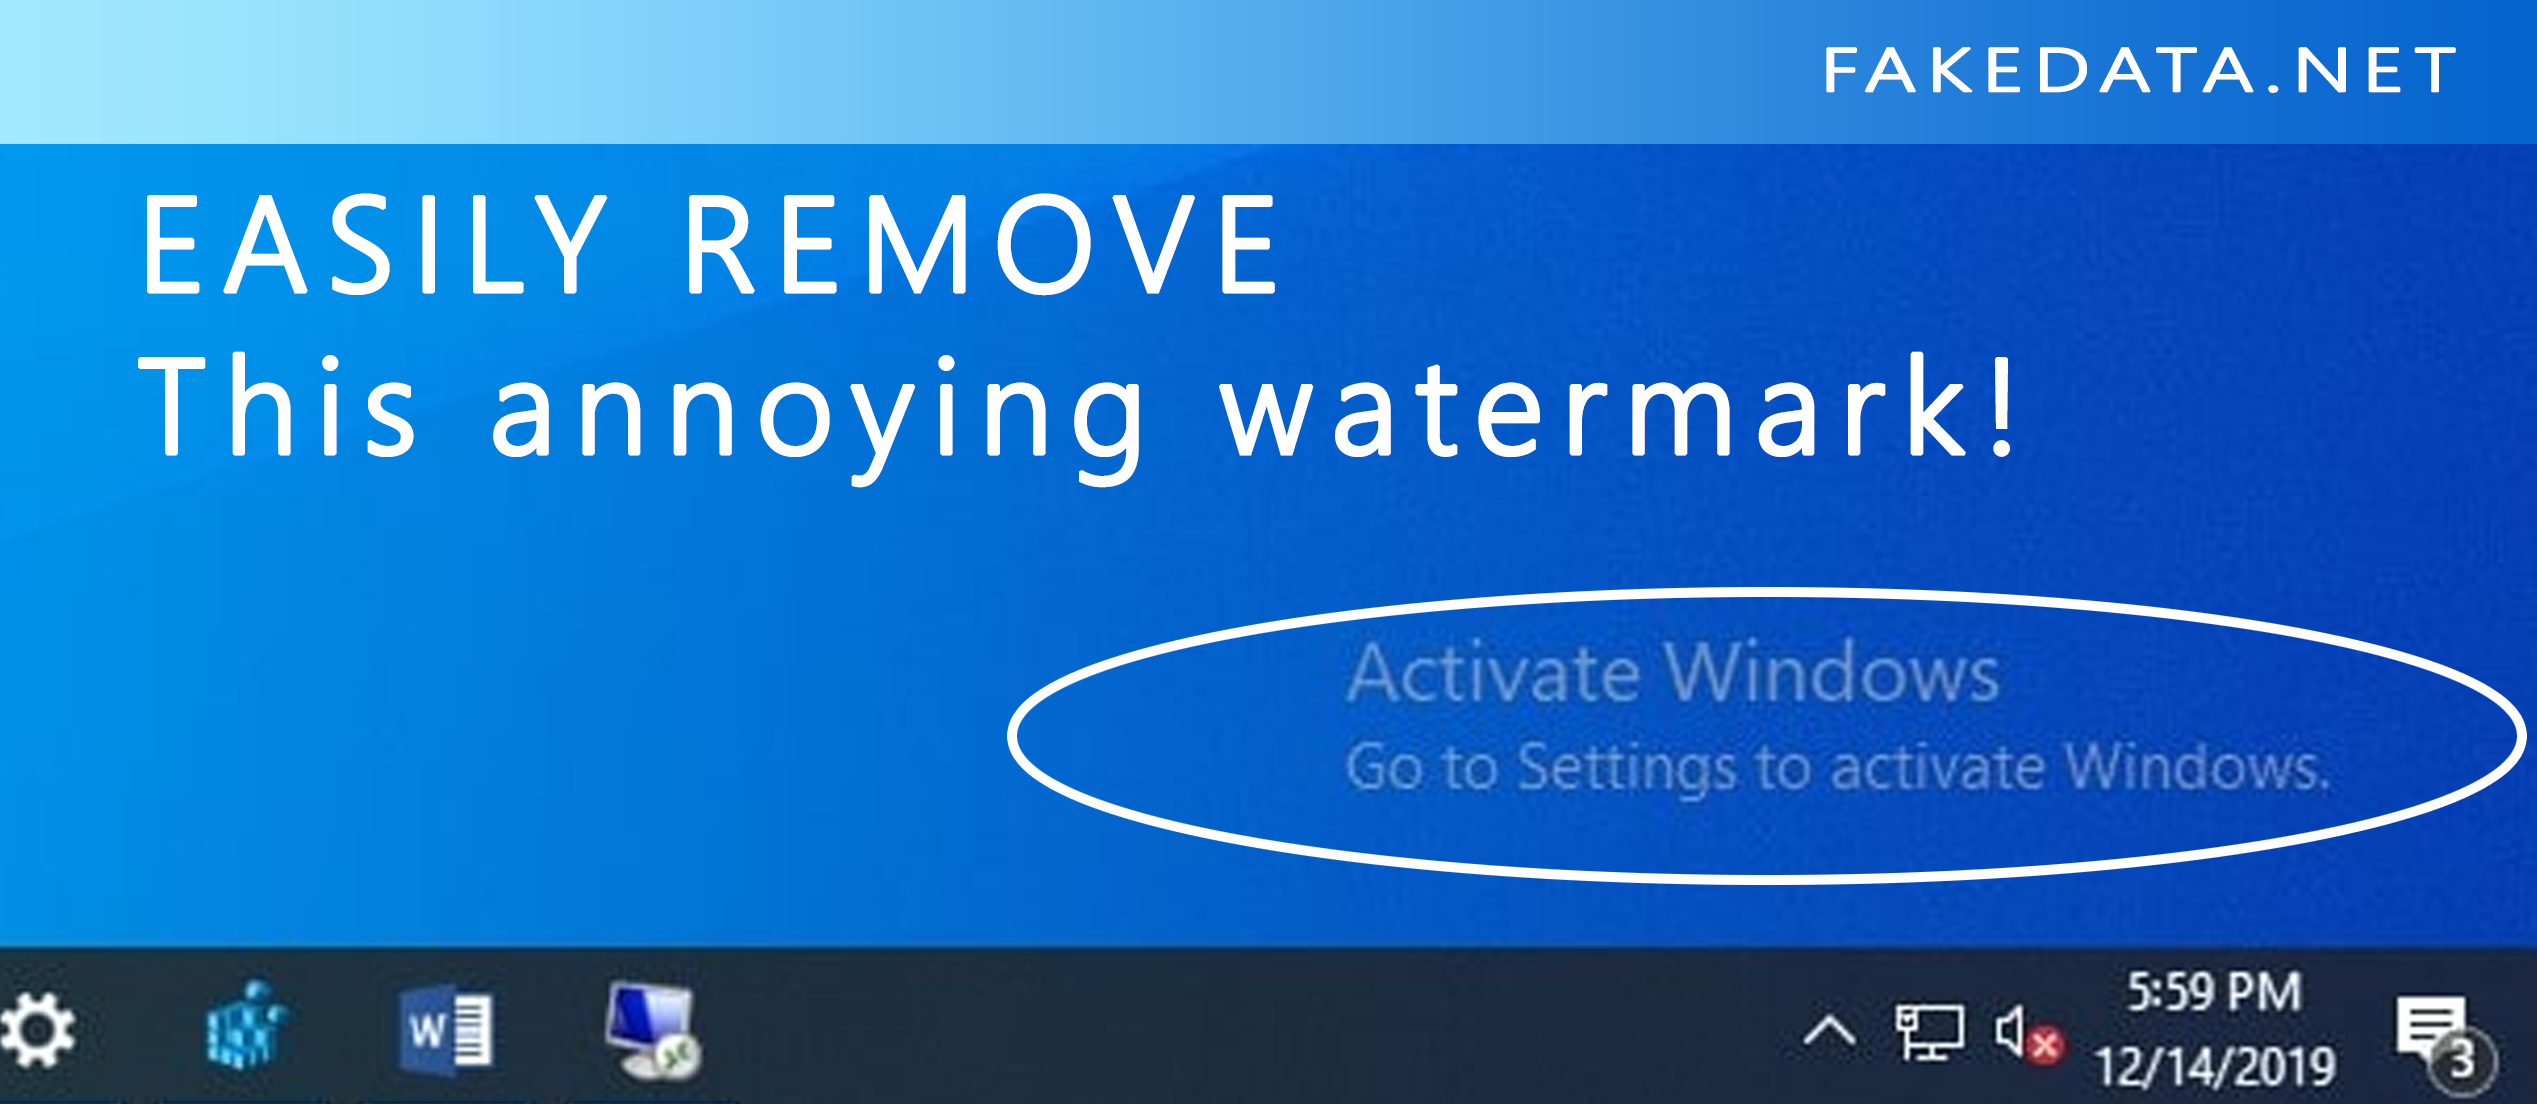 windows 10 activate windows watermark removal